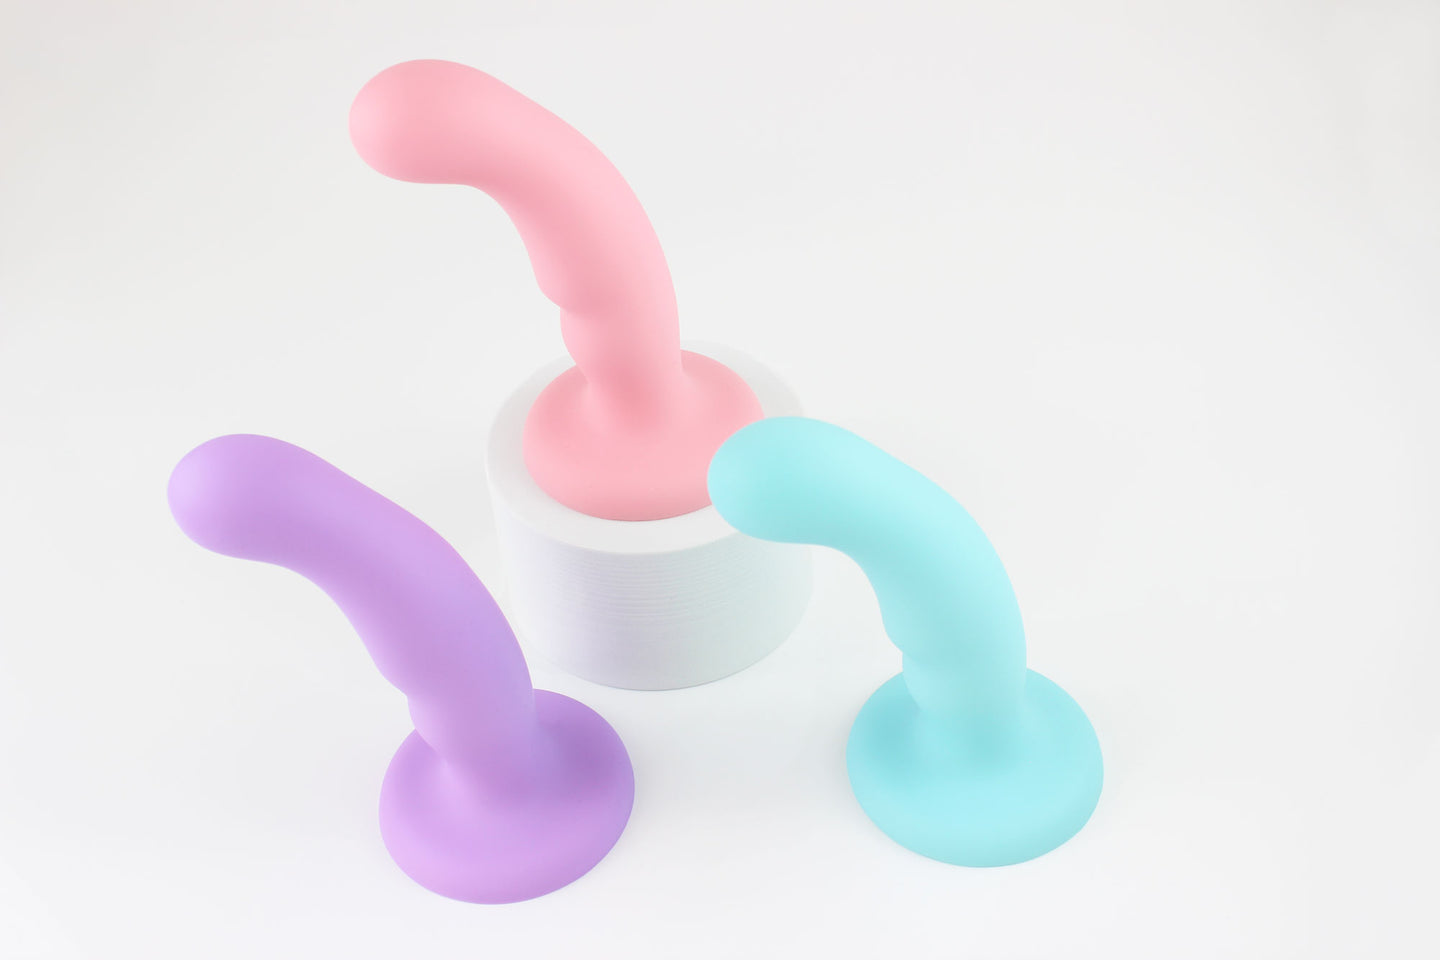 3 silicone dildos (light purple, light pink, and light blue) standing upright in front of white background